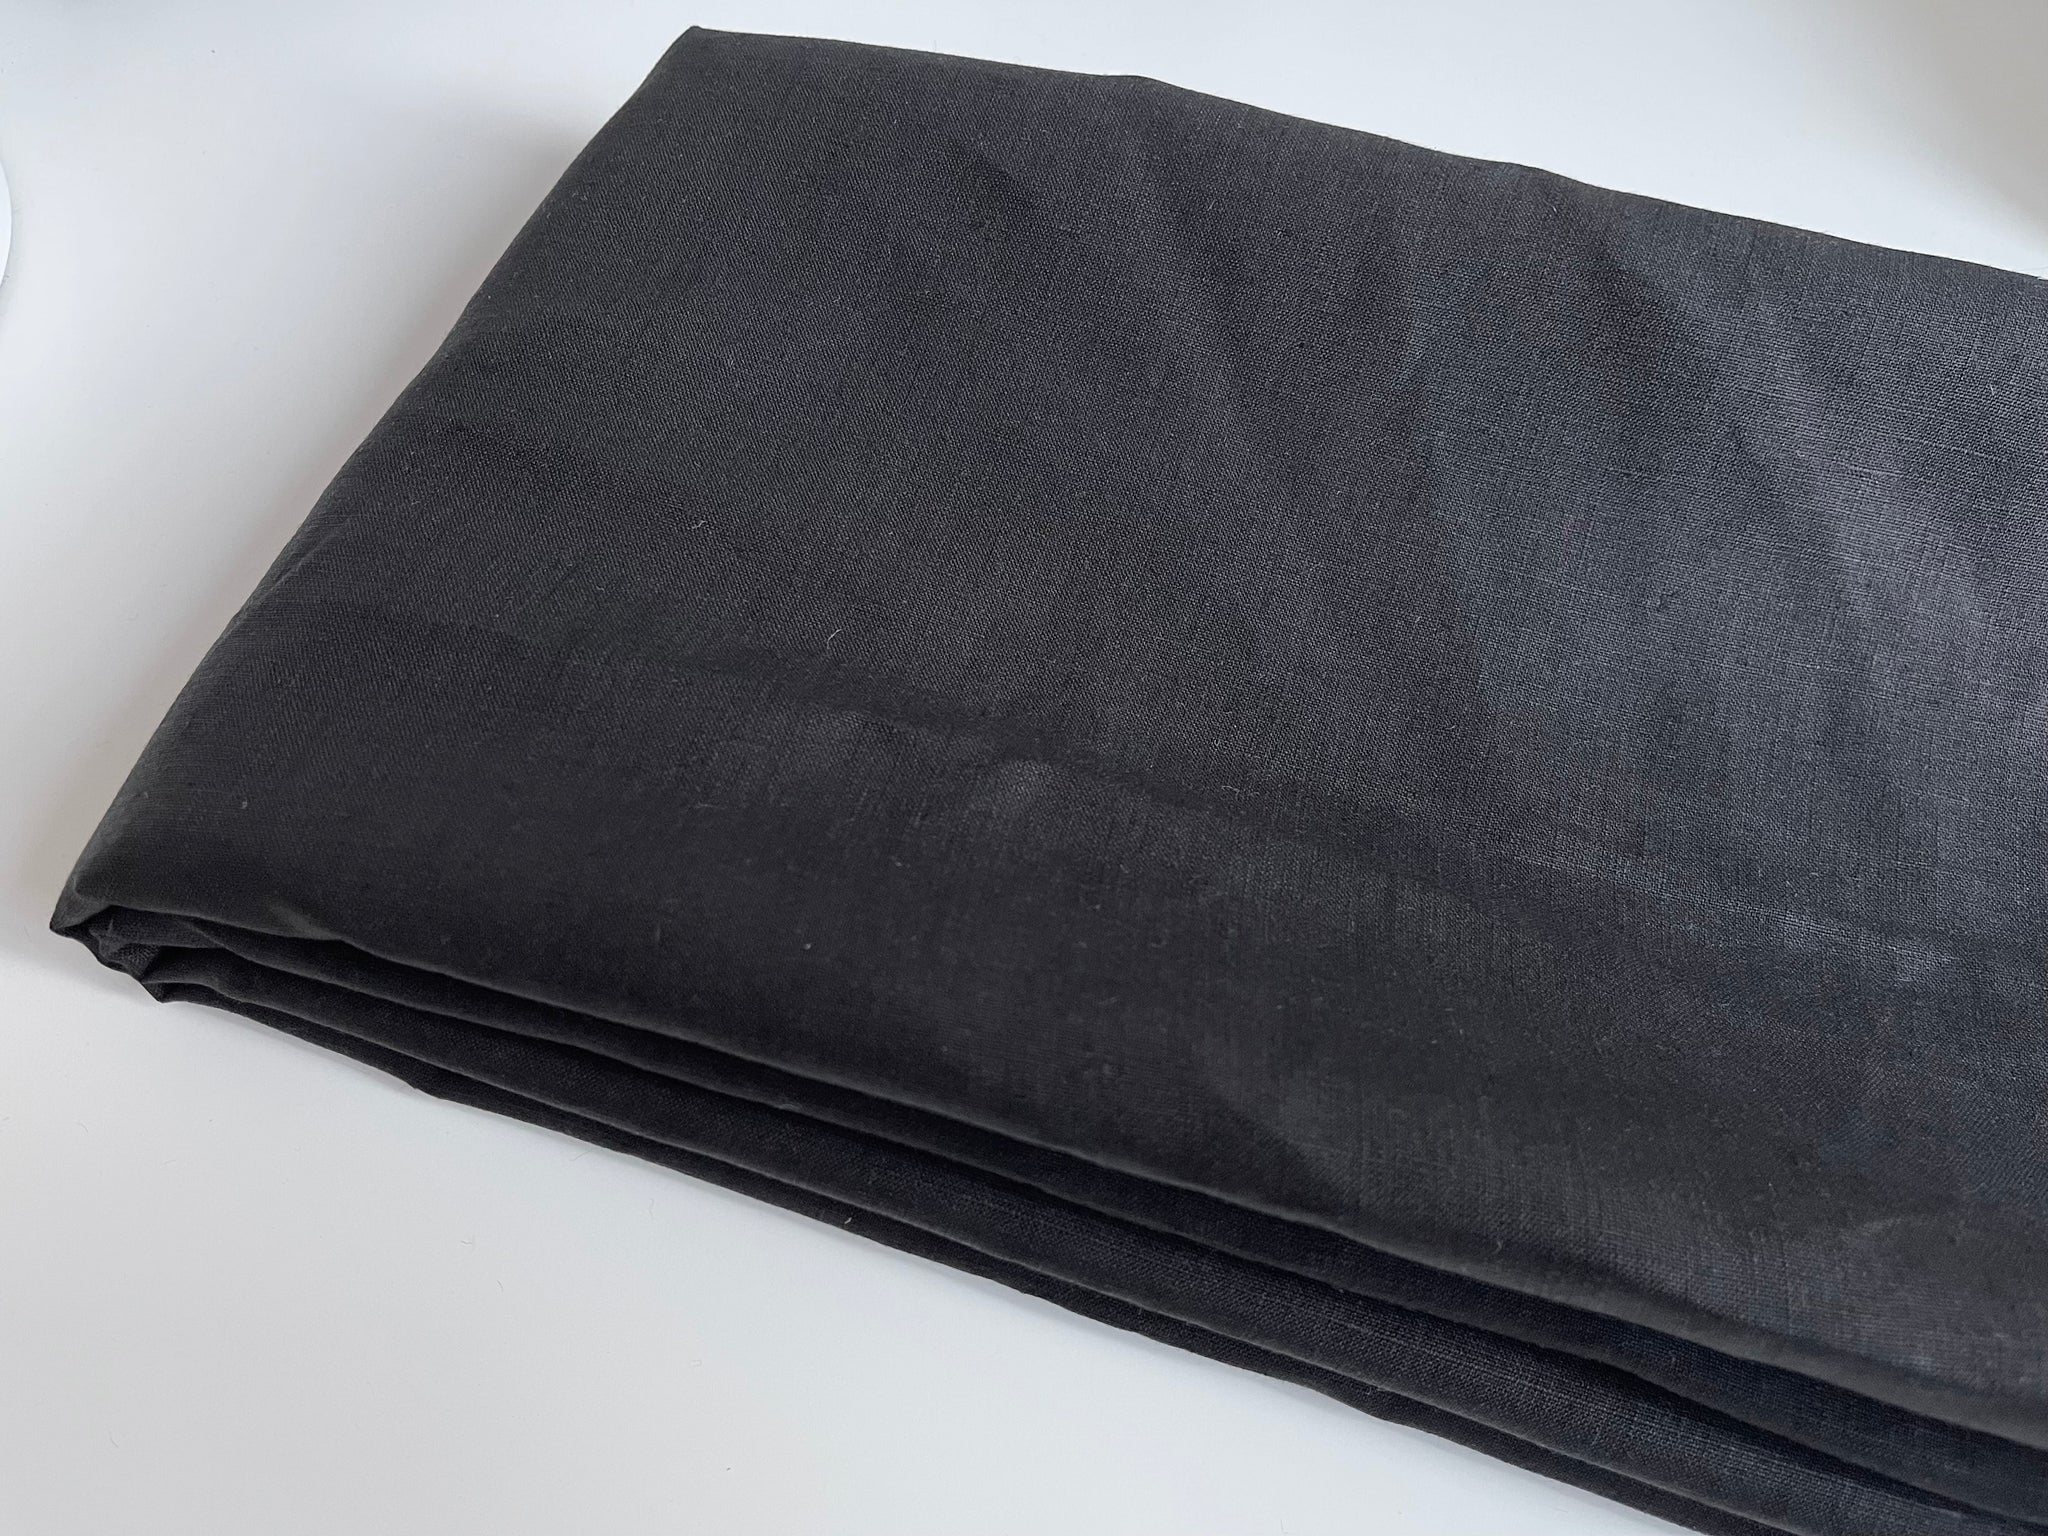 Linen Fabric Remnants - black - 1 cut 3.5 yards - small holes along selvage